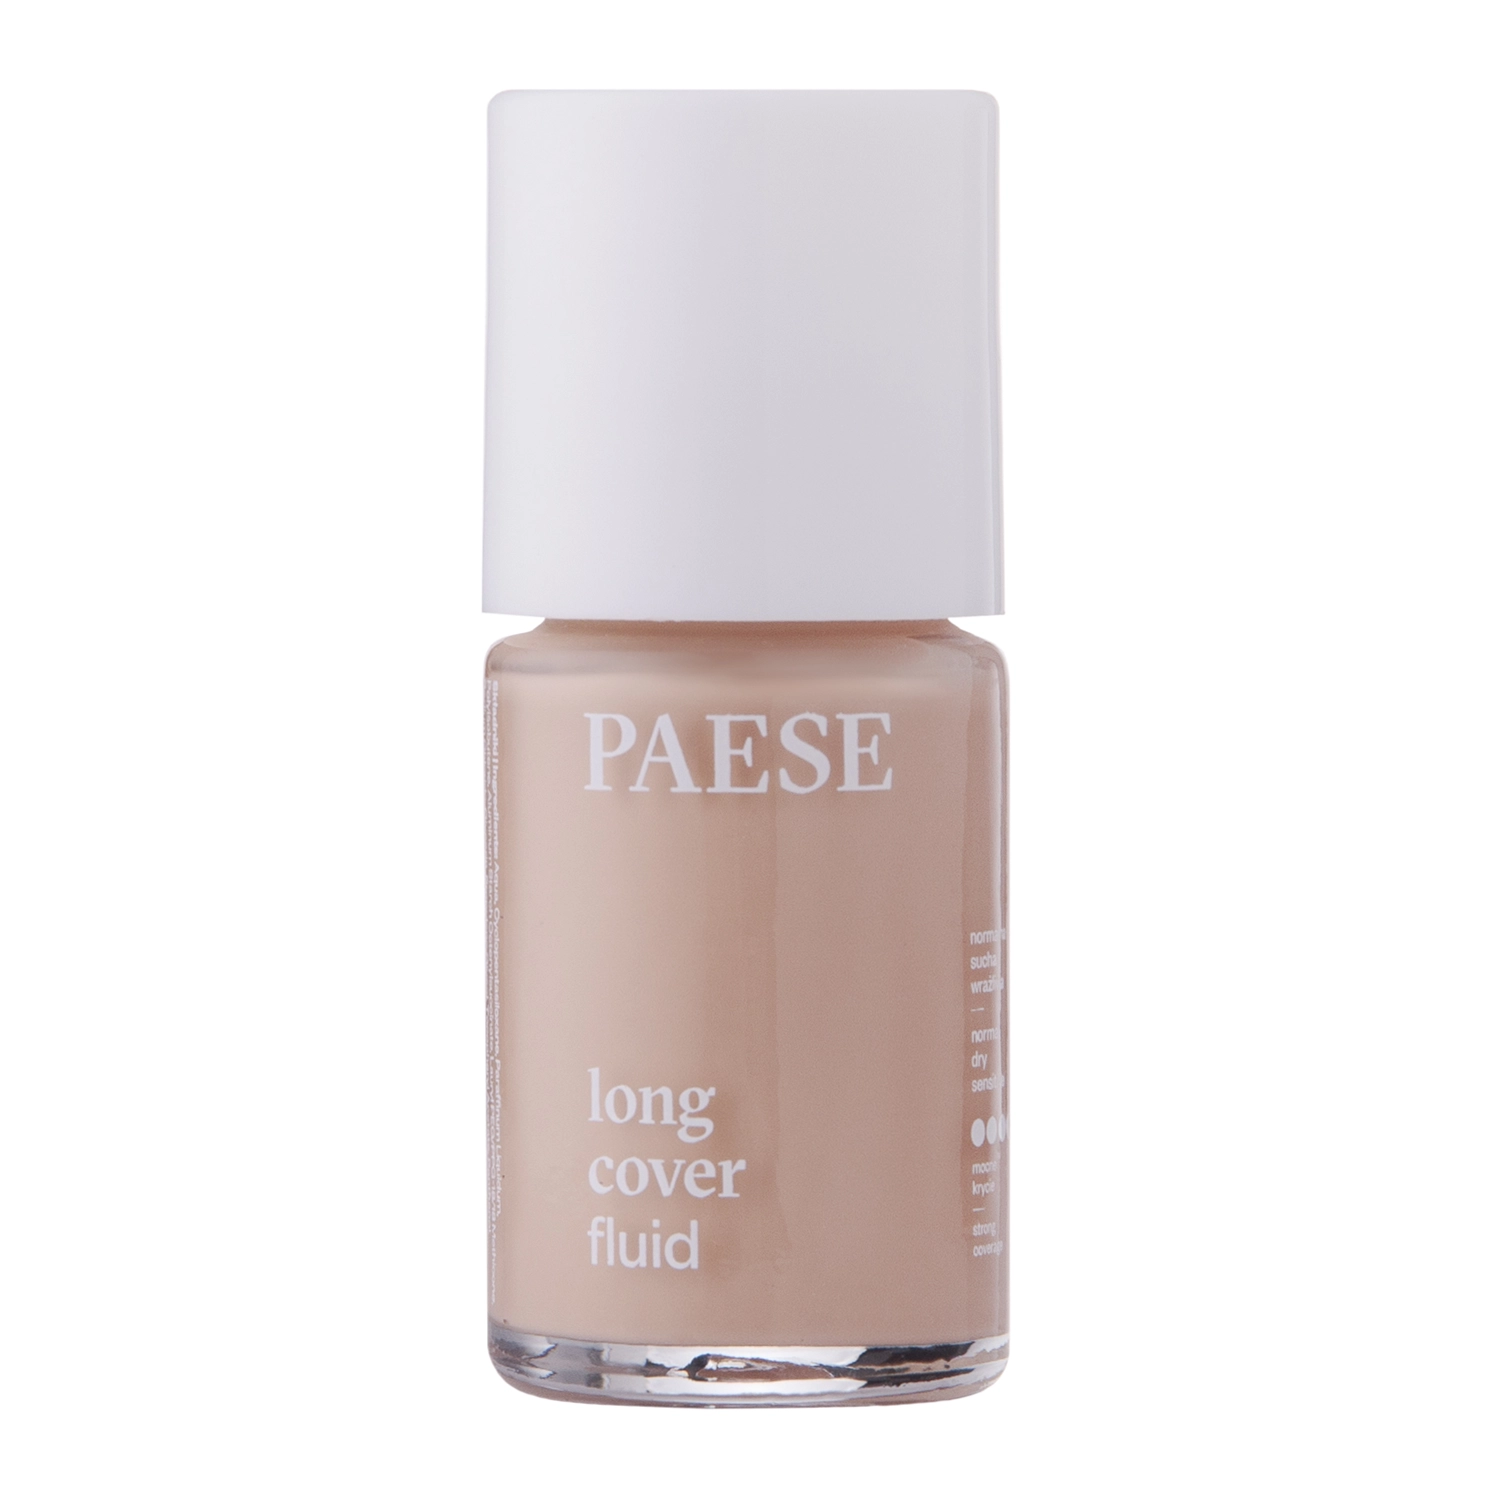 Paese - Long Cover Fluid - Krycí make-up - 1.5 Beige - 30 ml